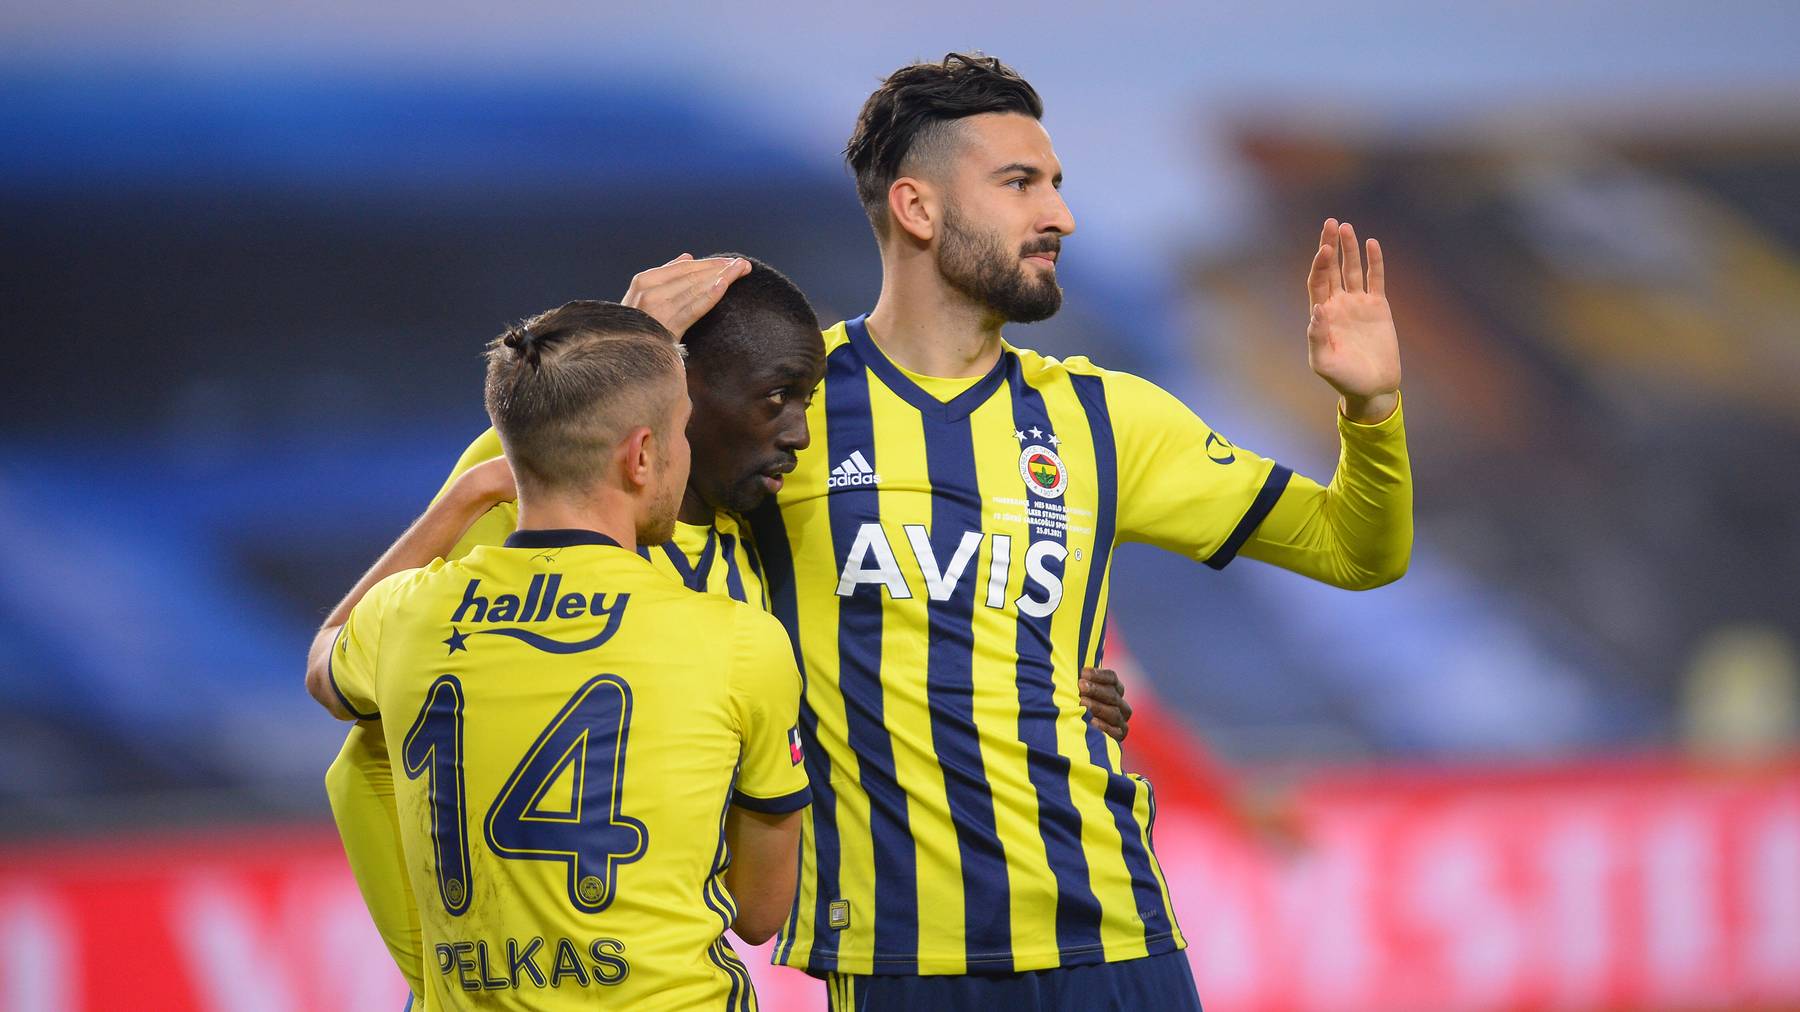 Dimitrios Pelkas (L) , Papiss Cisse and Kemal Ademi (R) of Fenerbahce during the Turkish Super League football match between Fenerbahce and Kayserispor at Ulker Stadium in Istanbul Turkey on January 25 , 2021. PUBLICATIONxNOTxINxTUR